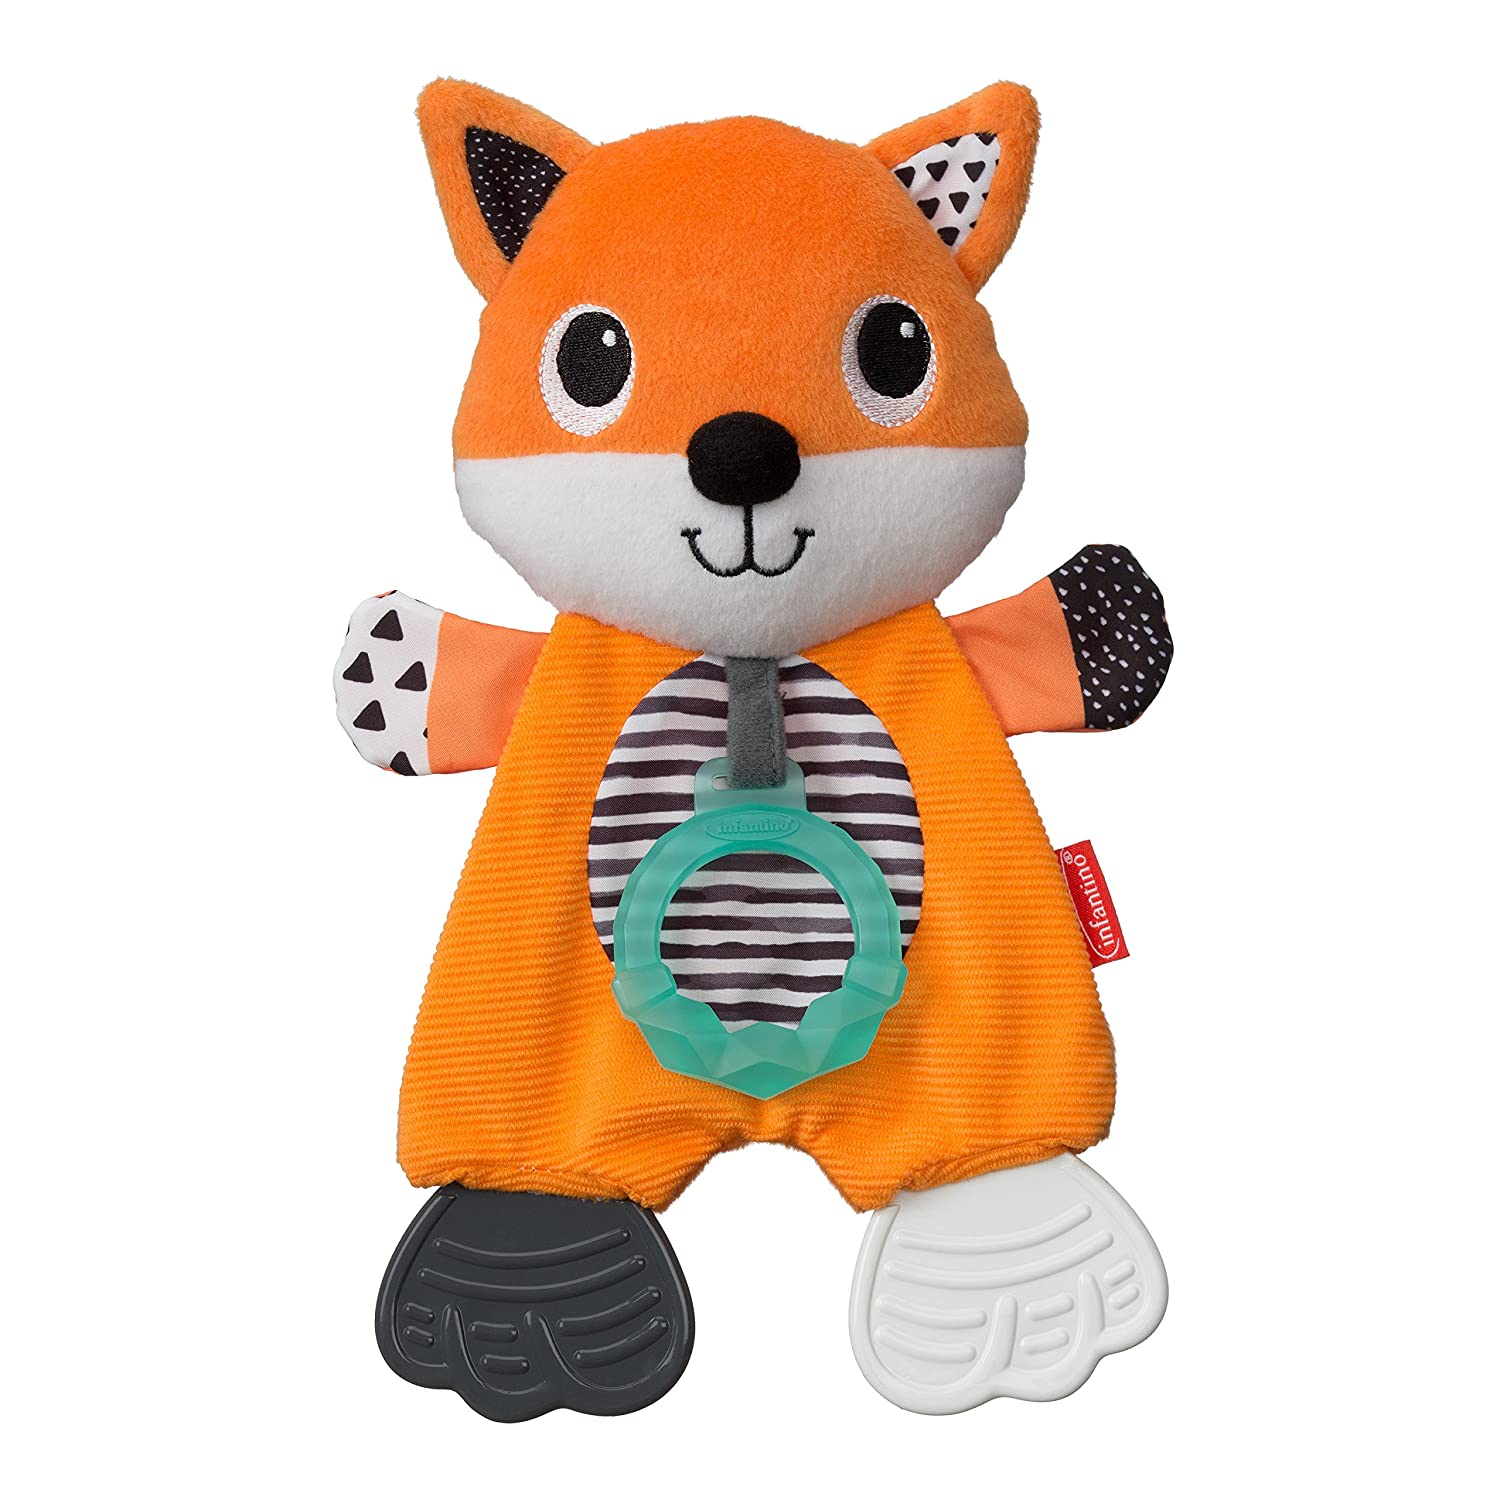 Infantino Cuddly Teether, Fox, 5.25 x 2 x 11 Inch (Pack of 1)